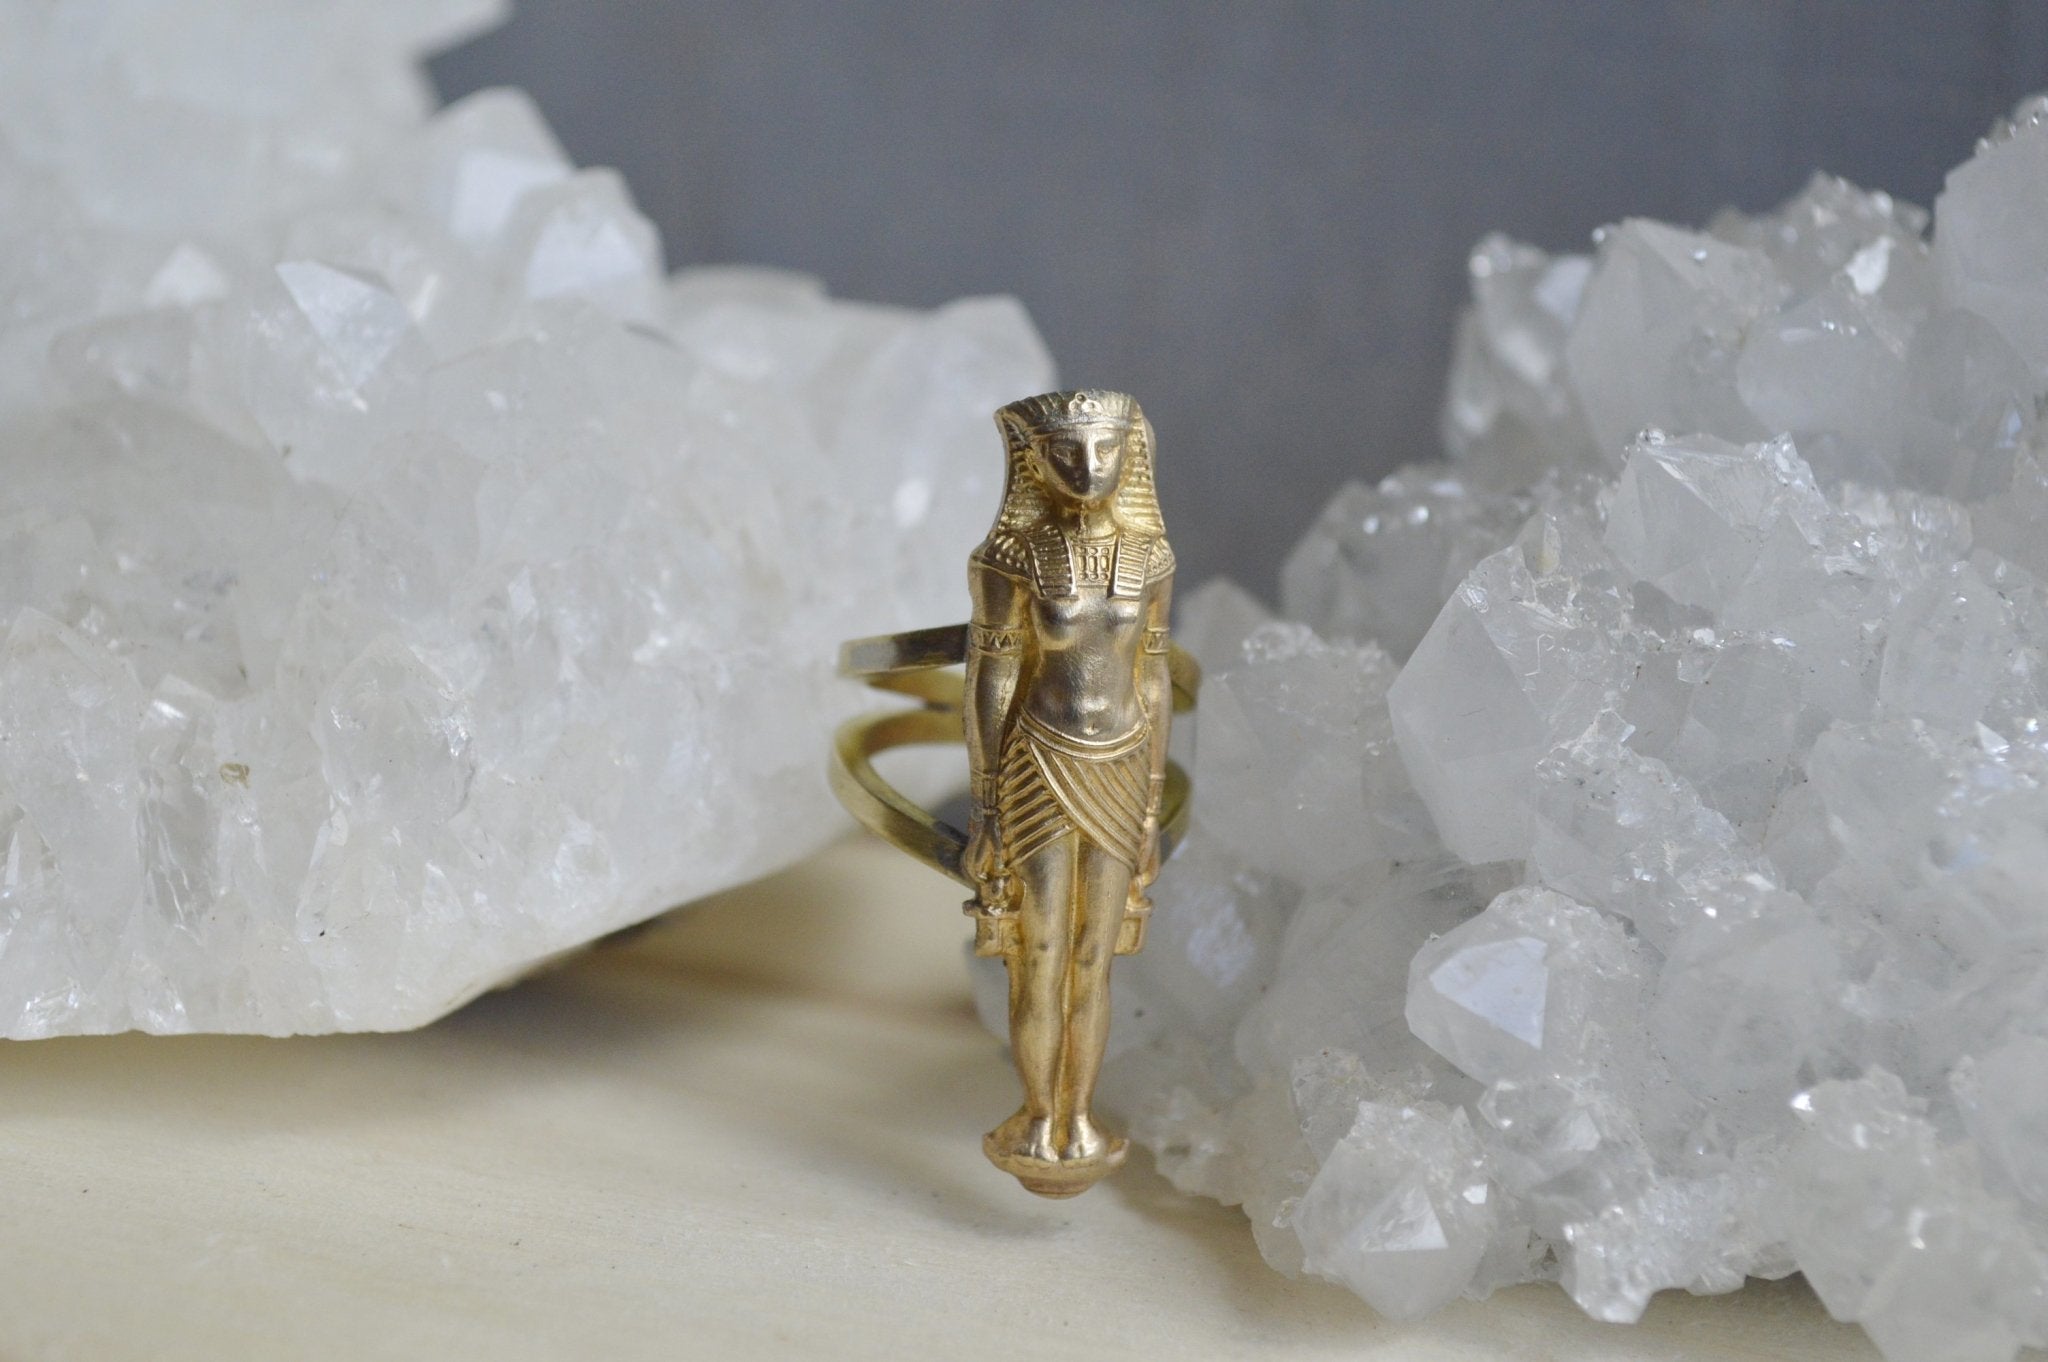 Statuesque Vintage Egyptian Revival Ring - We Love Brass